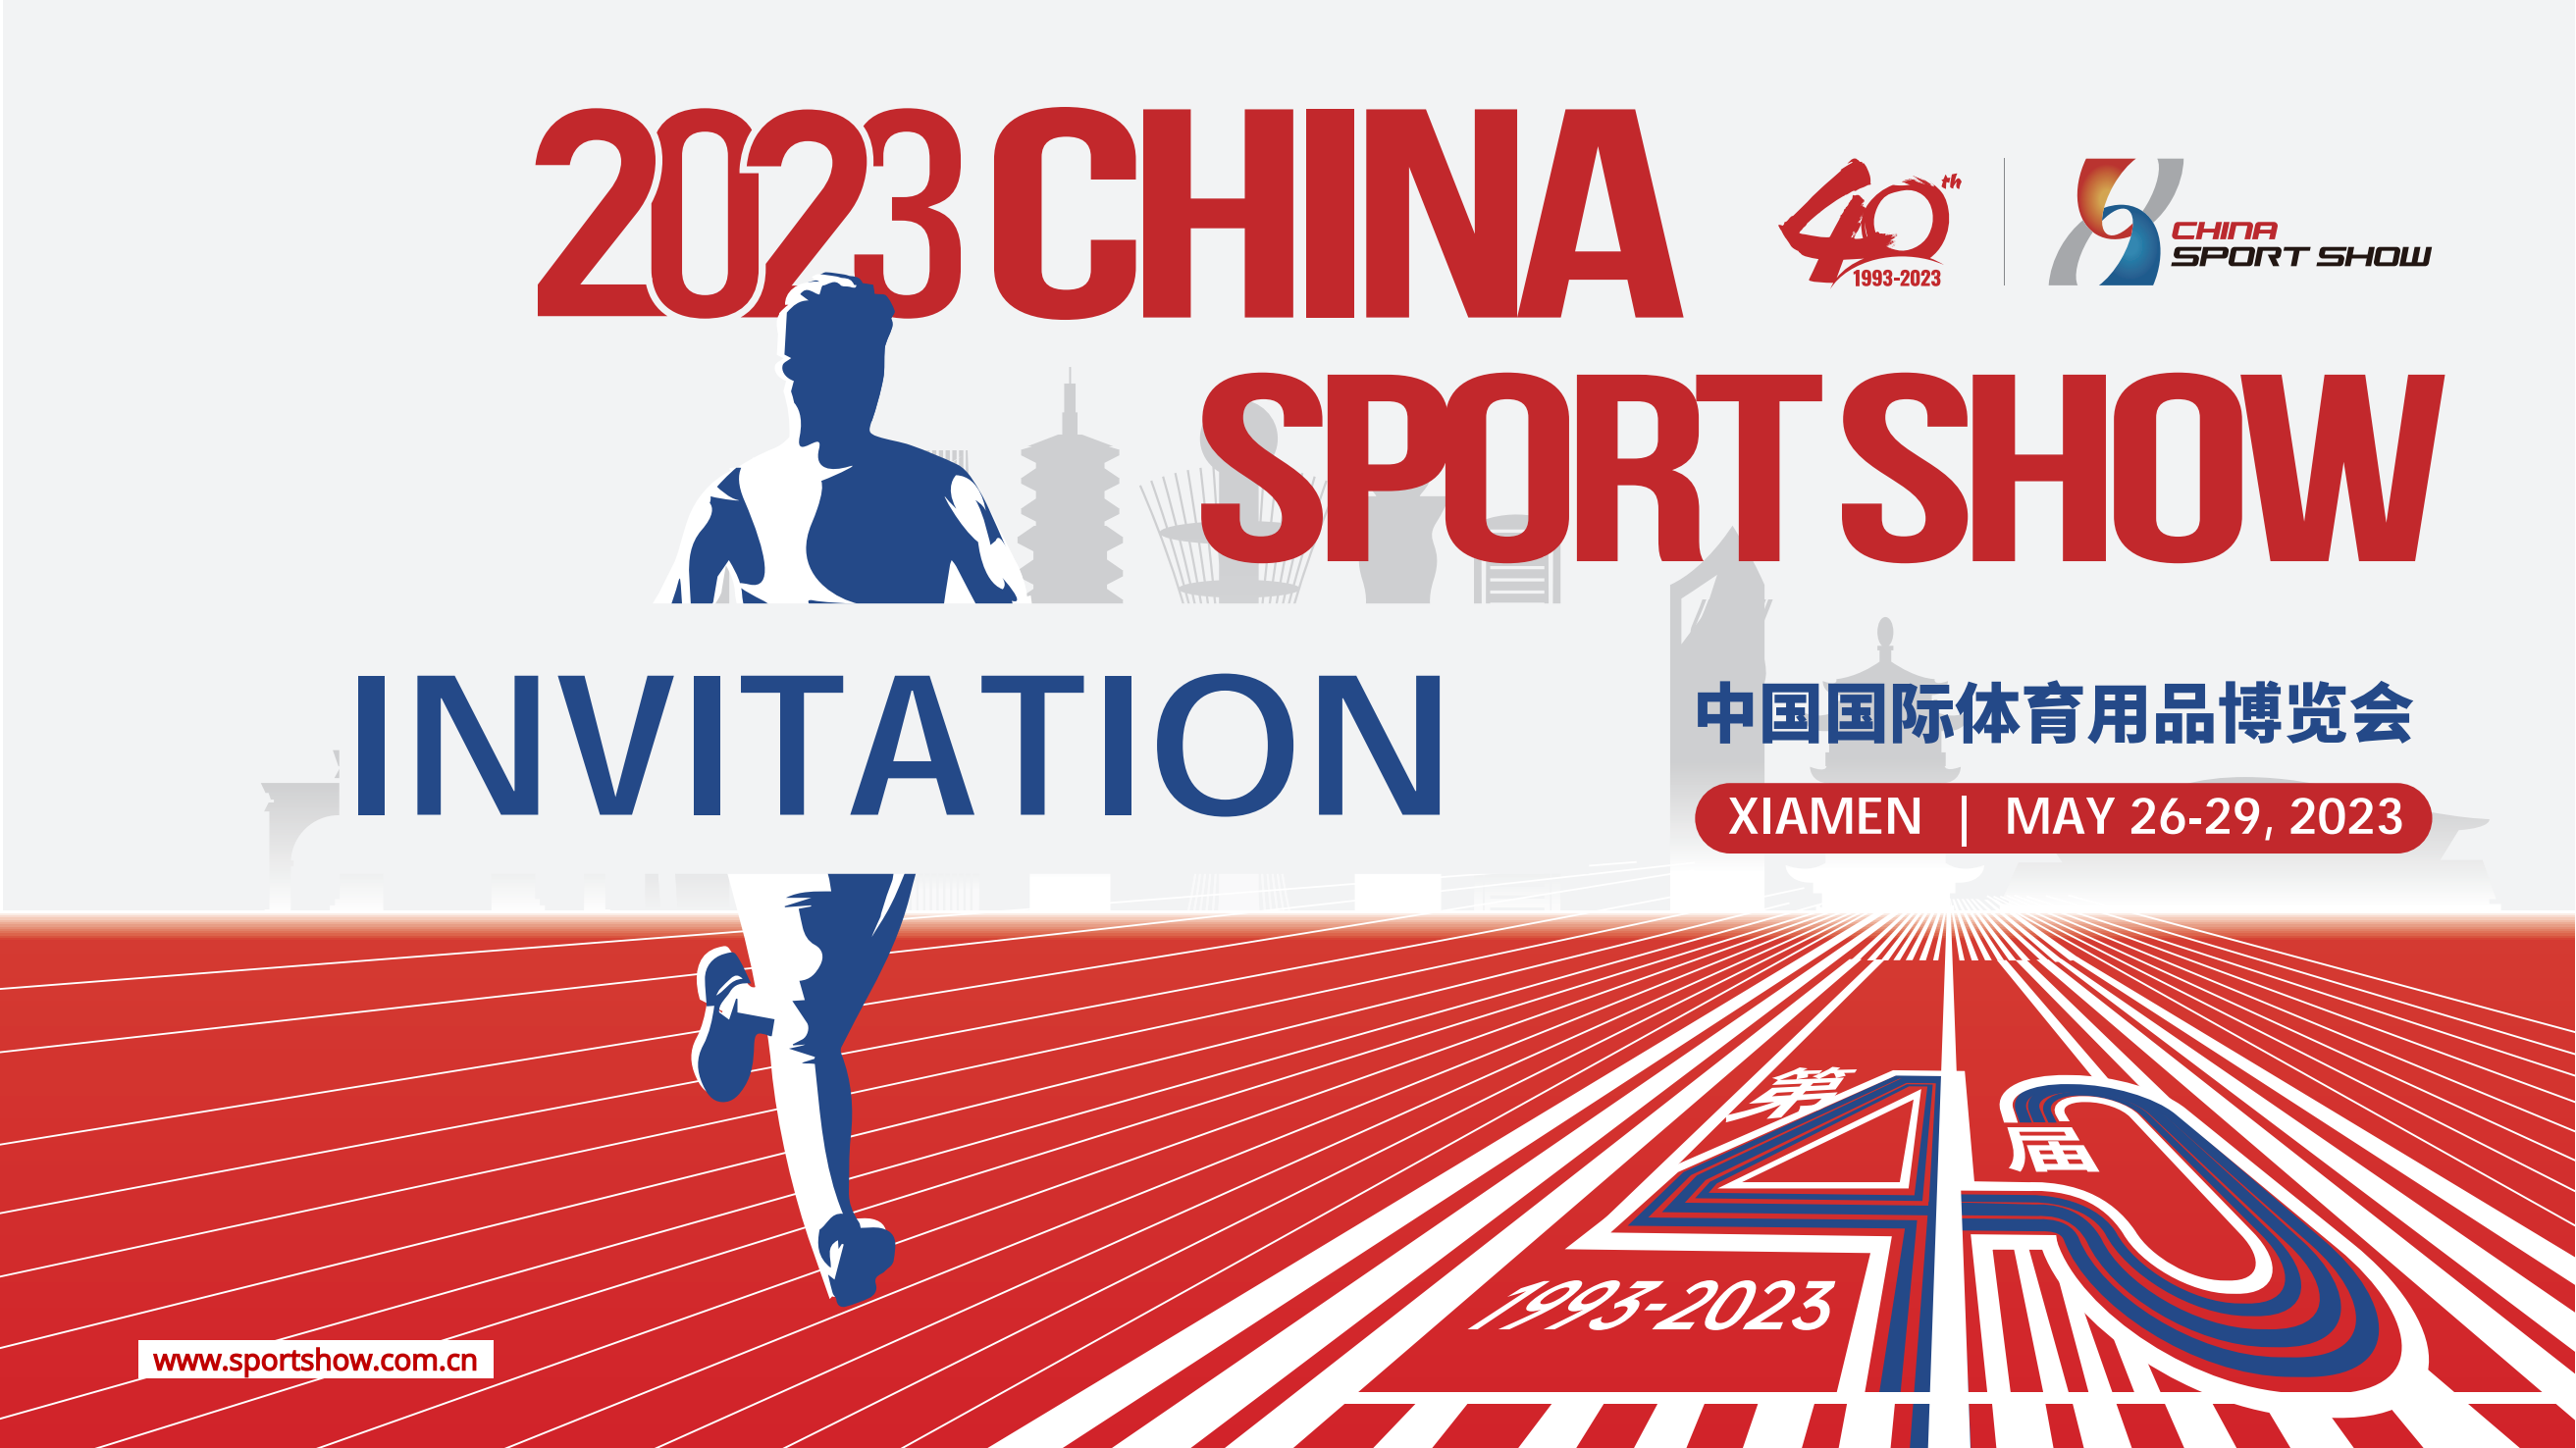 China Sport Show 2023 will be held May 2629 in Xiamen International